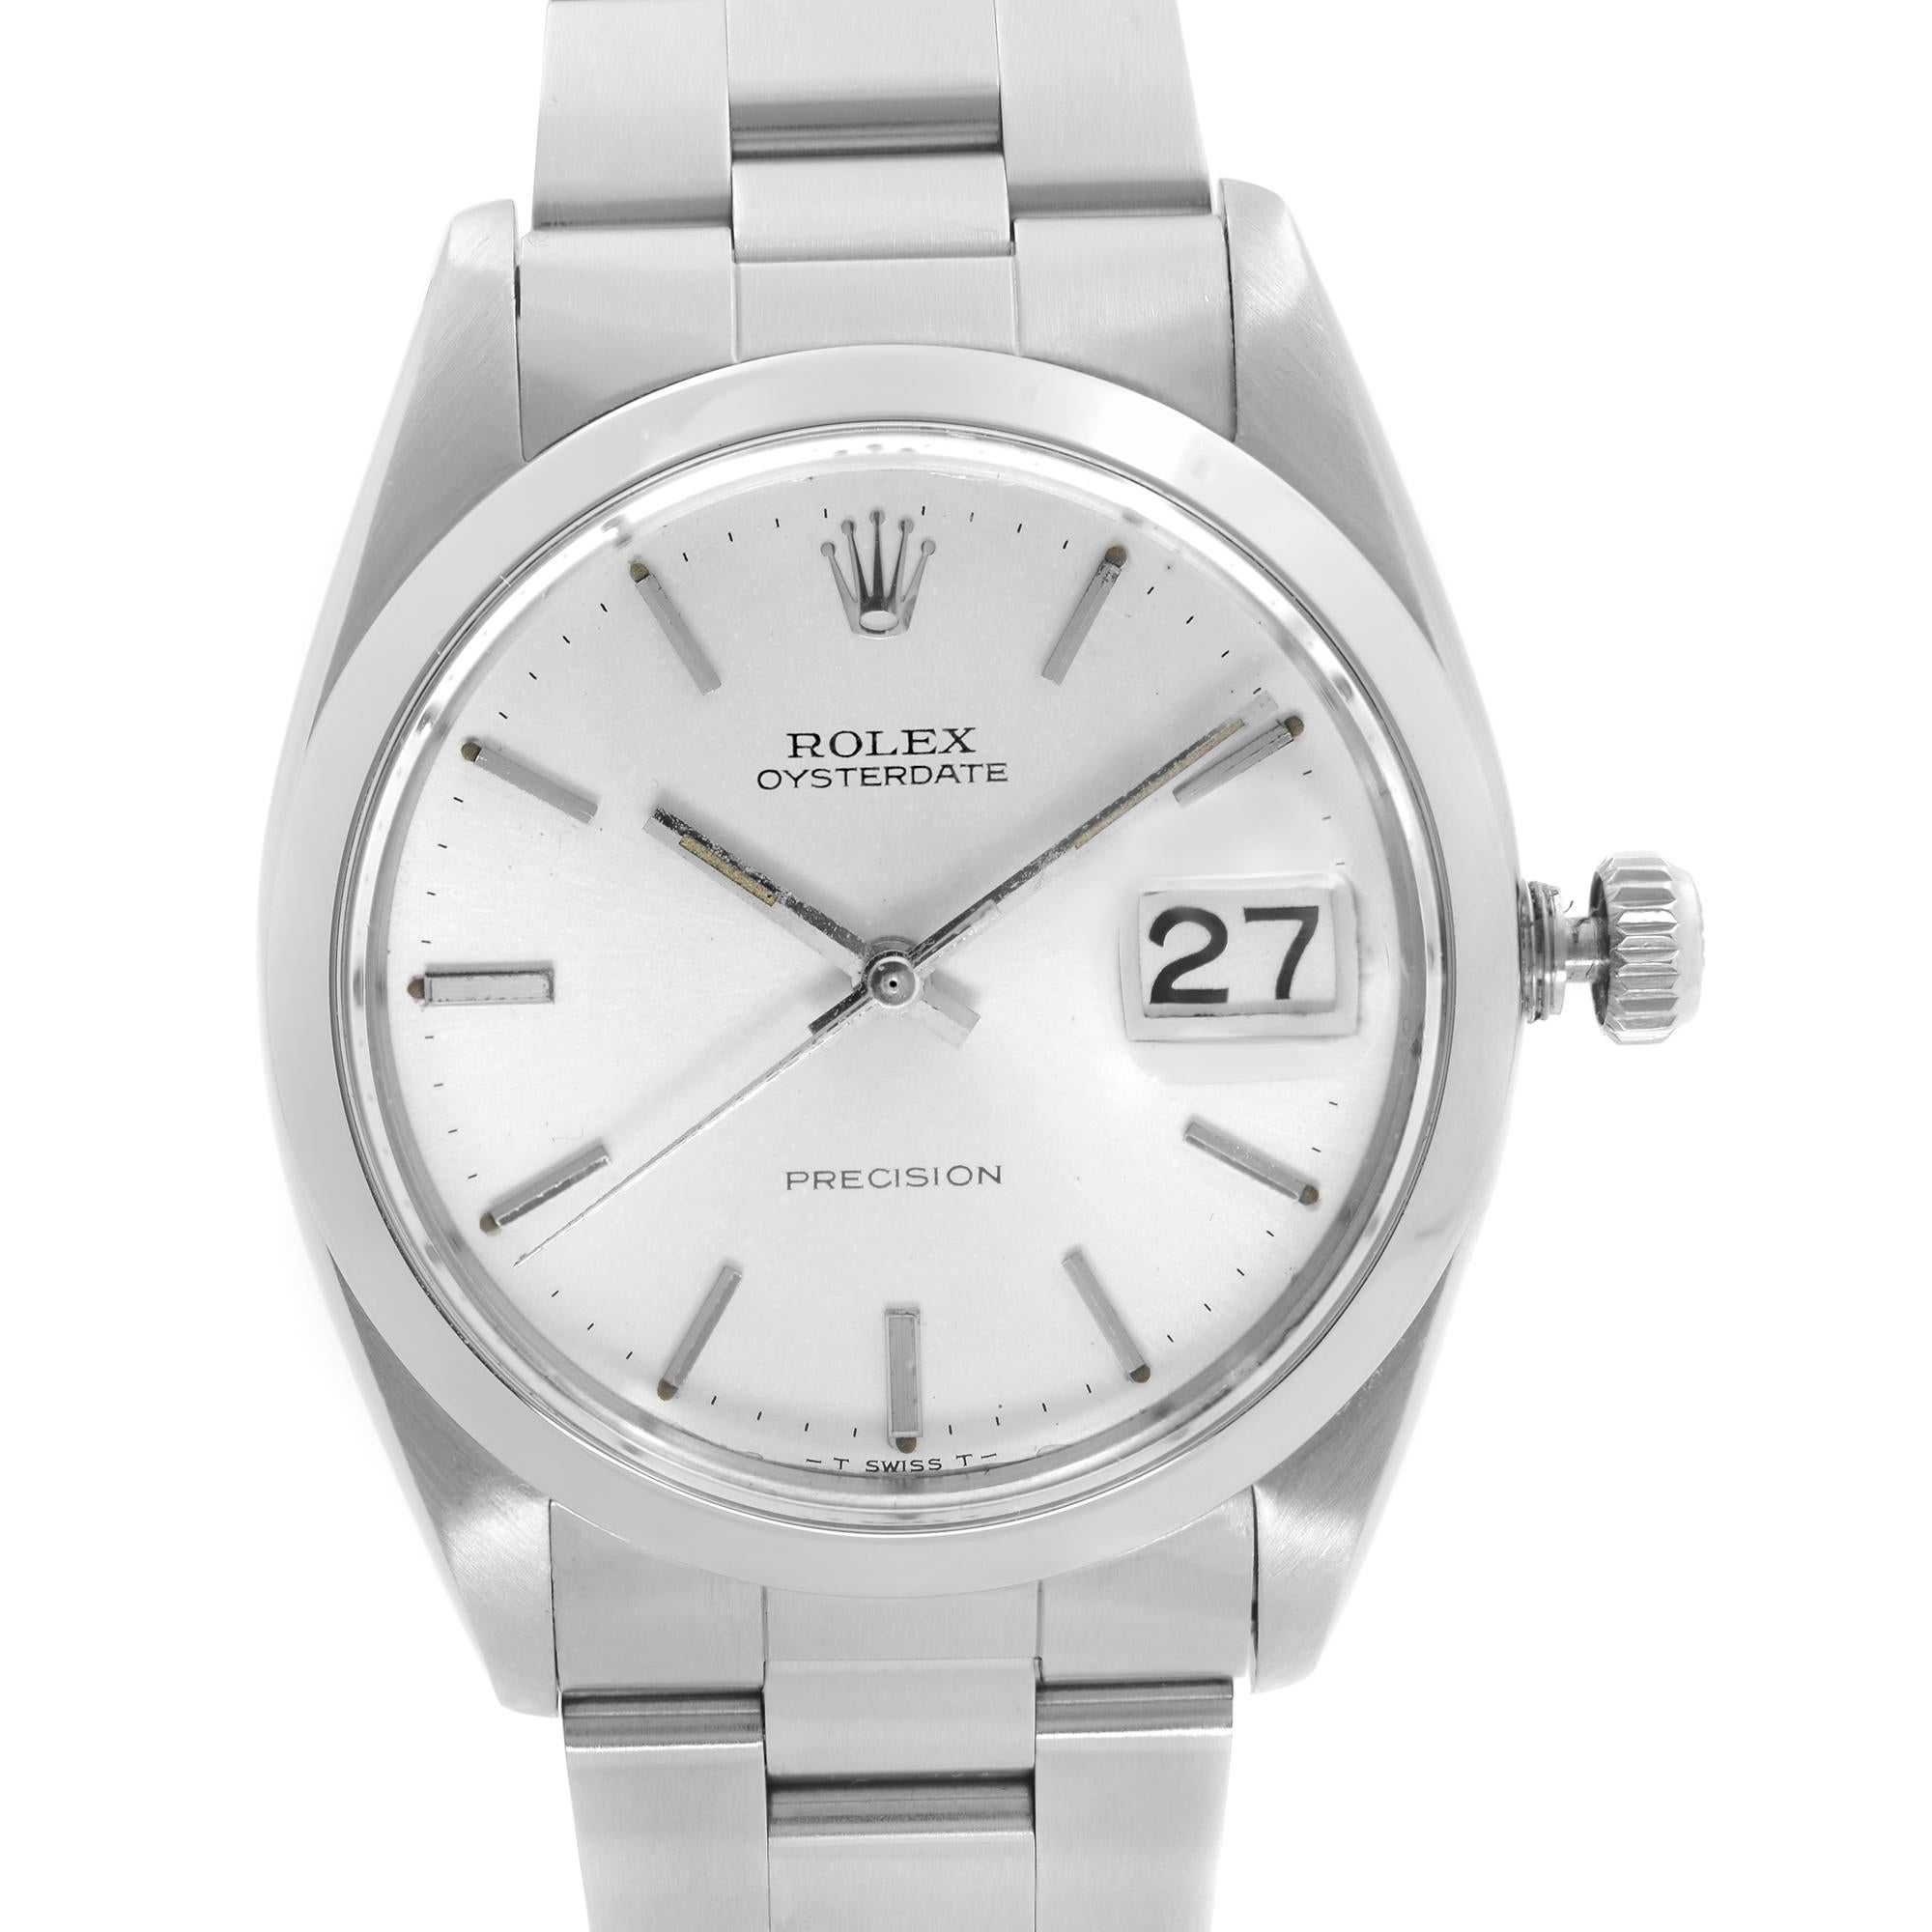 Pre-Owned Rolex Oysterdate Precision 34mm Steel Silver Dial Manual Wind Men's Watch 6694. This Beautiful Timepiece was Produced in 1966 & is Powered by Mechanical (Manual Wind) Movement And Features: Round Stainless Steel Case with a Stainless Steel